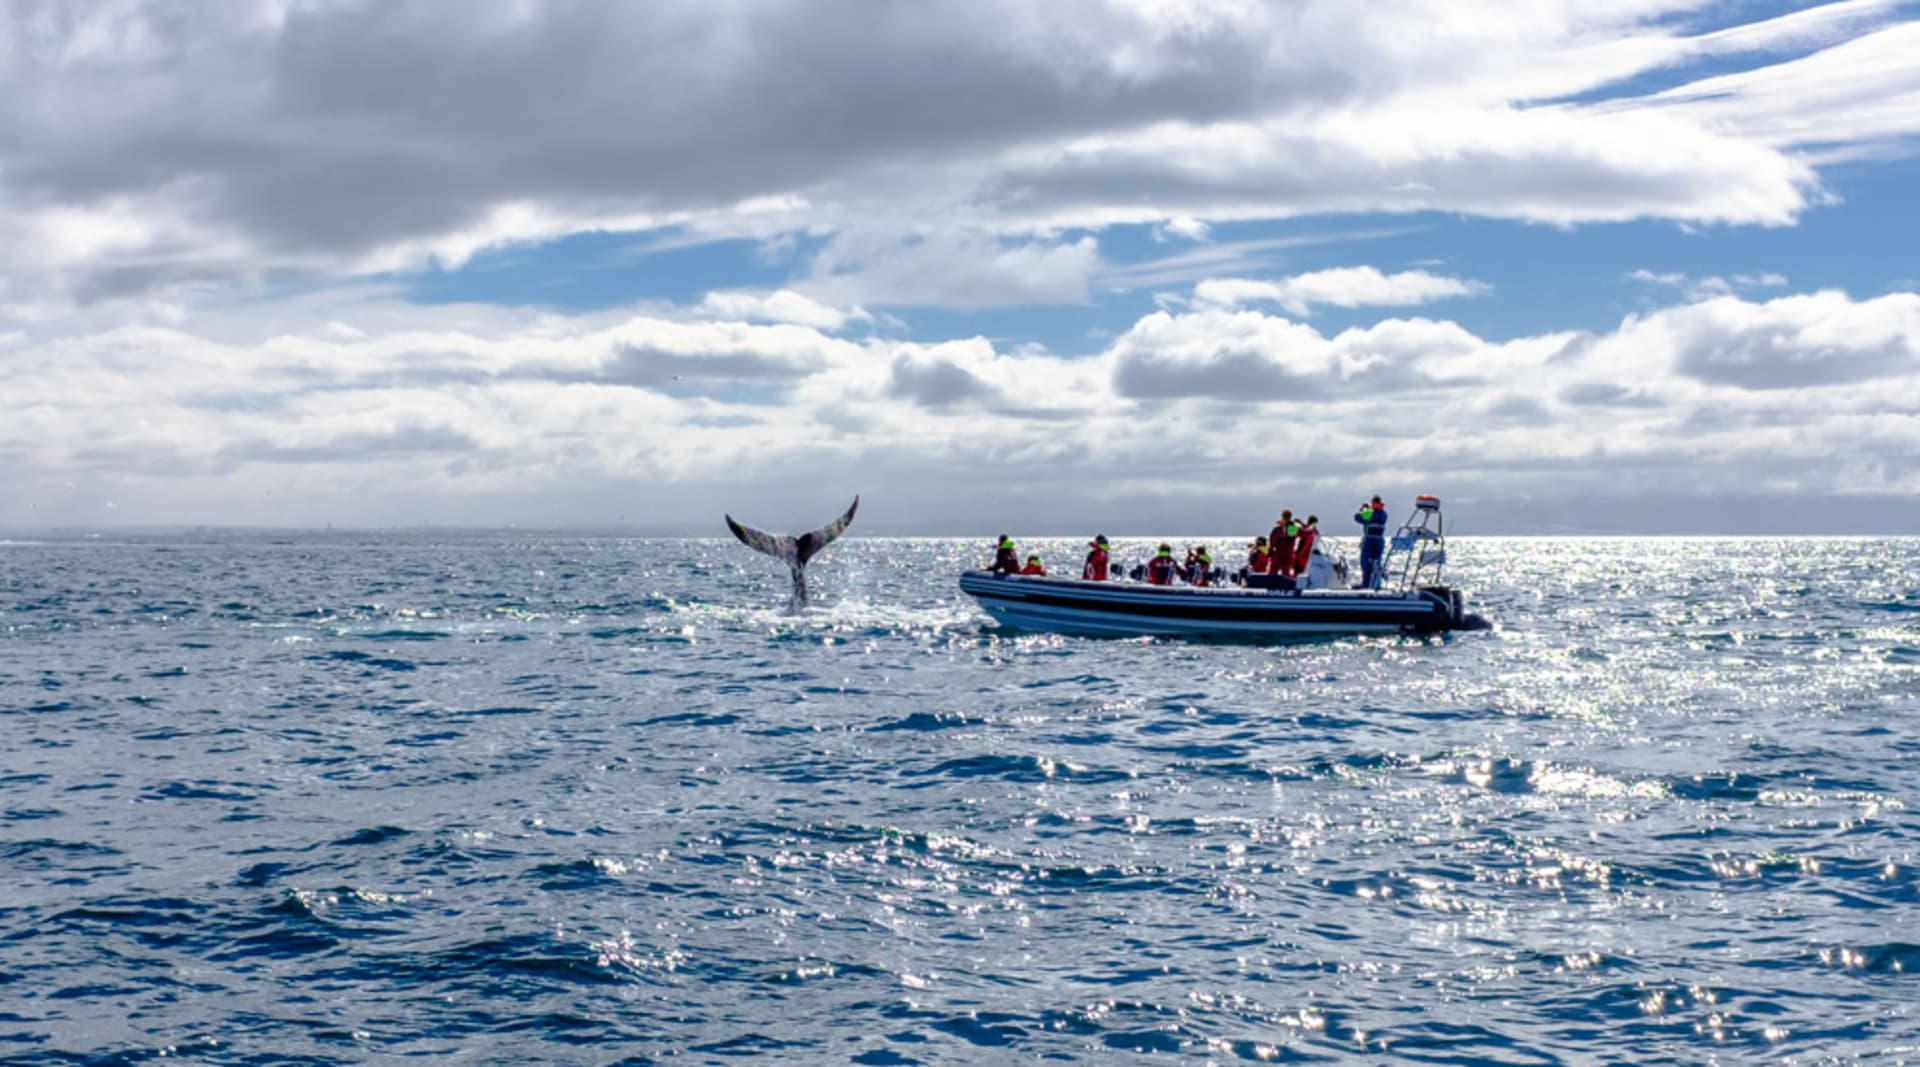 Humpback showing off by one of our RIB boats